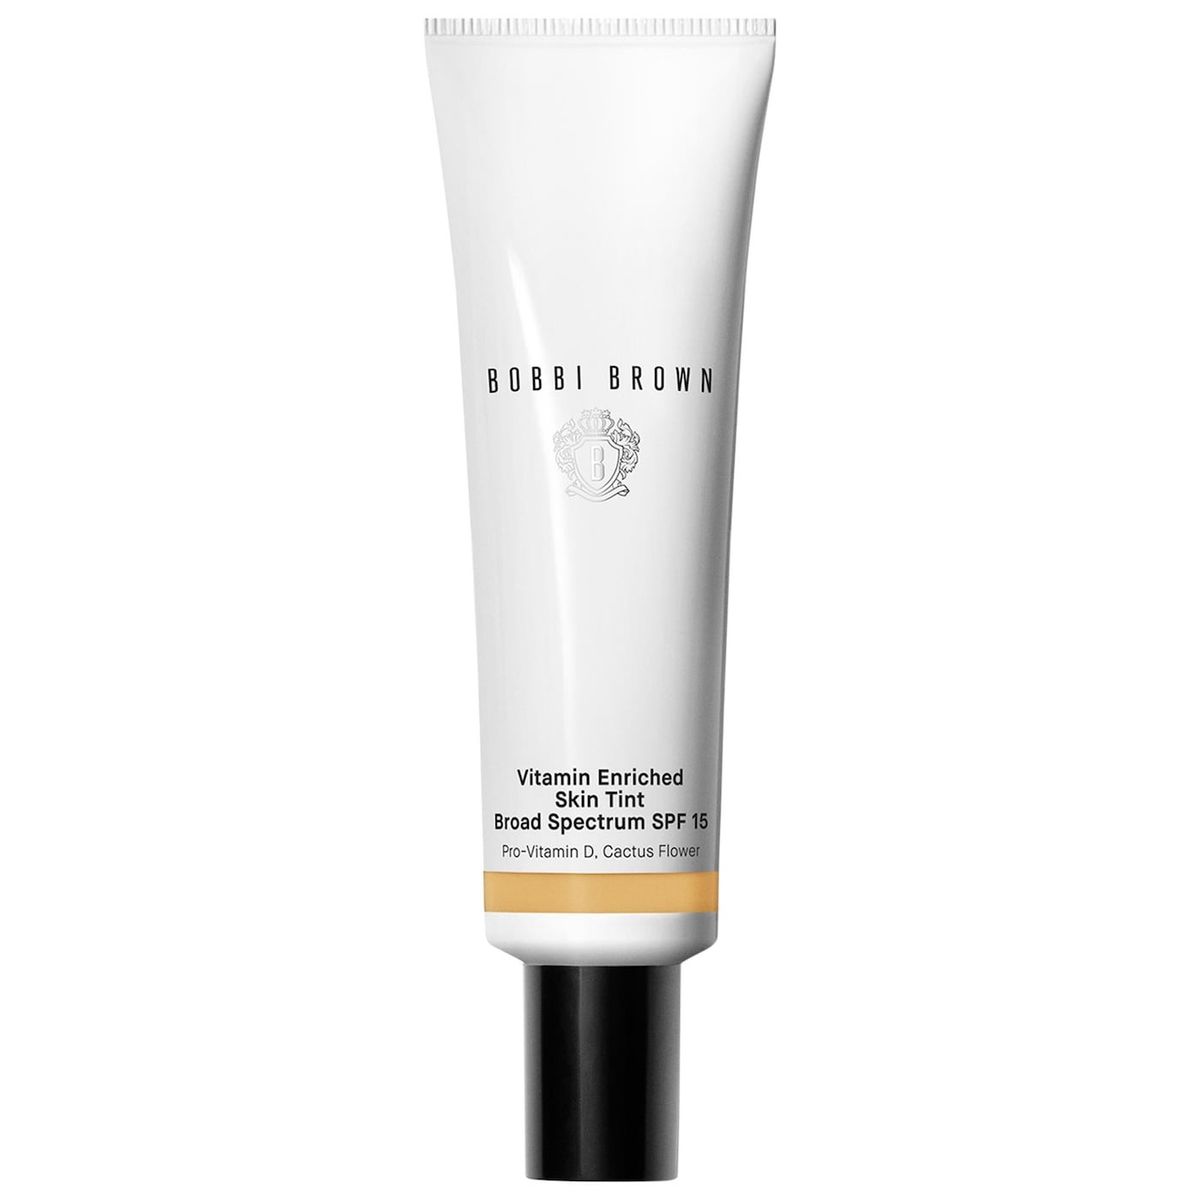 Vitamin Enriched Hydrating Skin Tint SPF 15 with Hyaluronic Acid